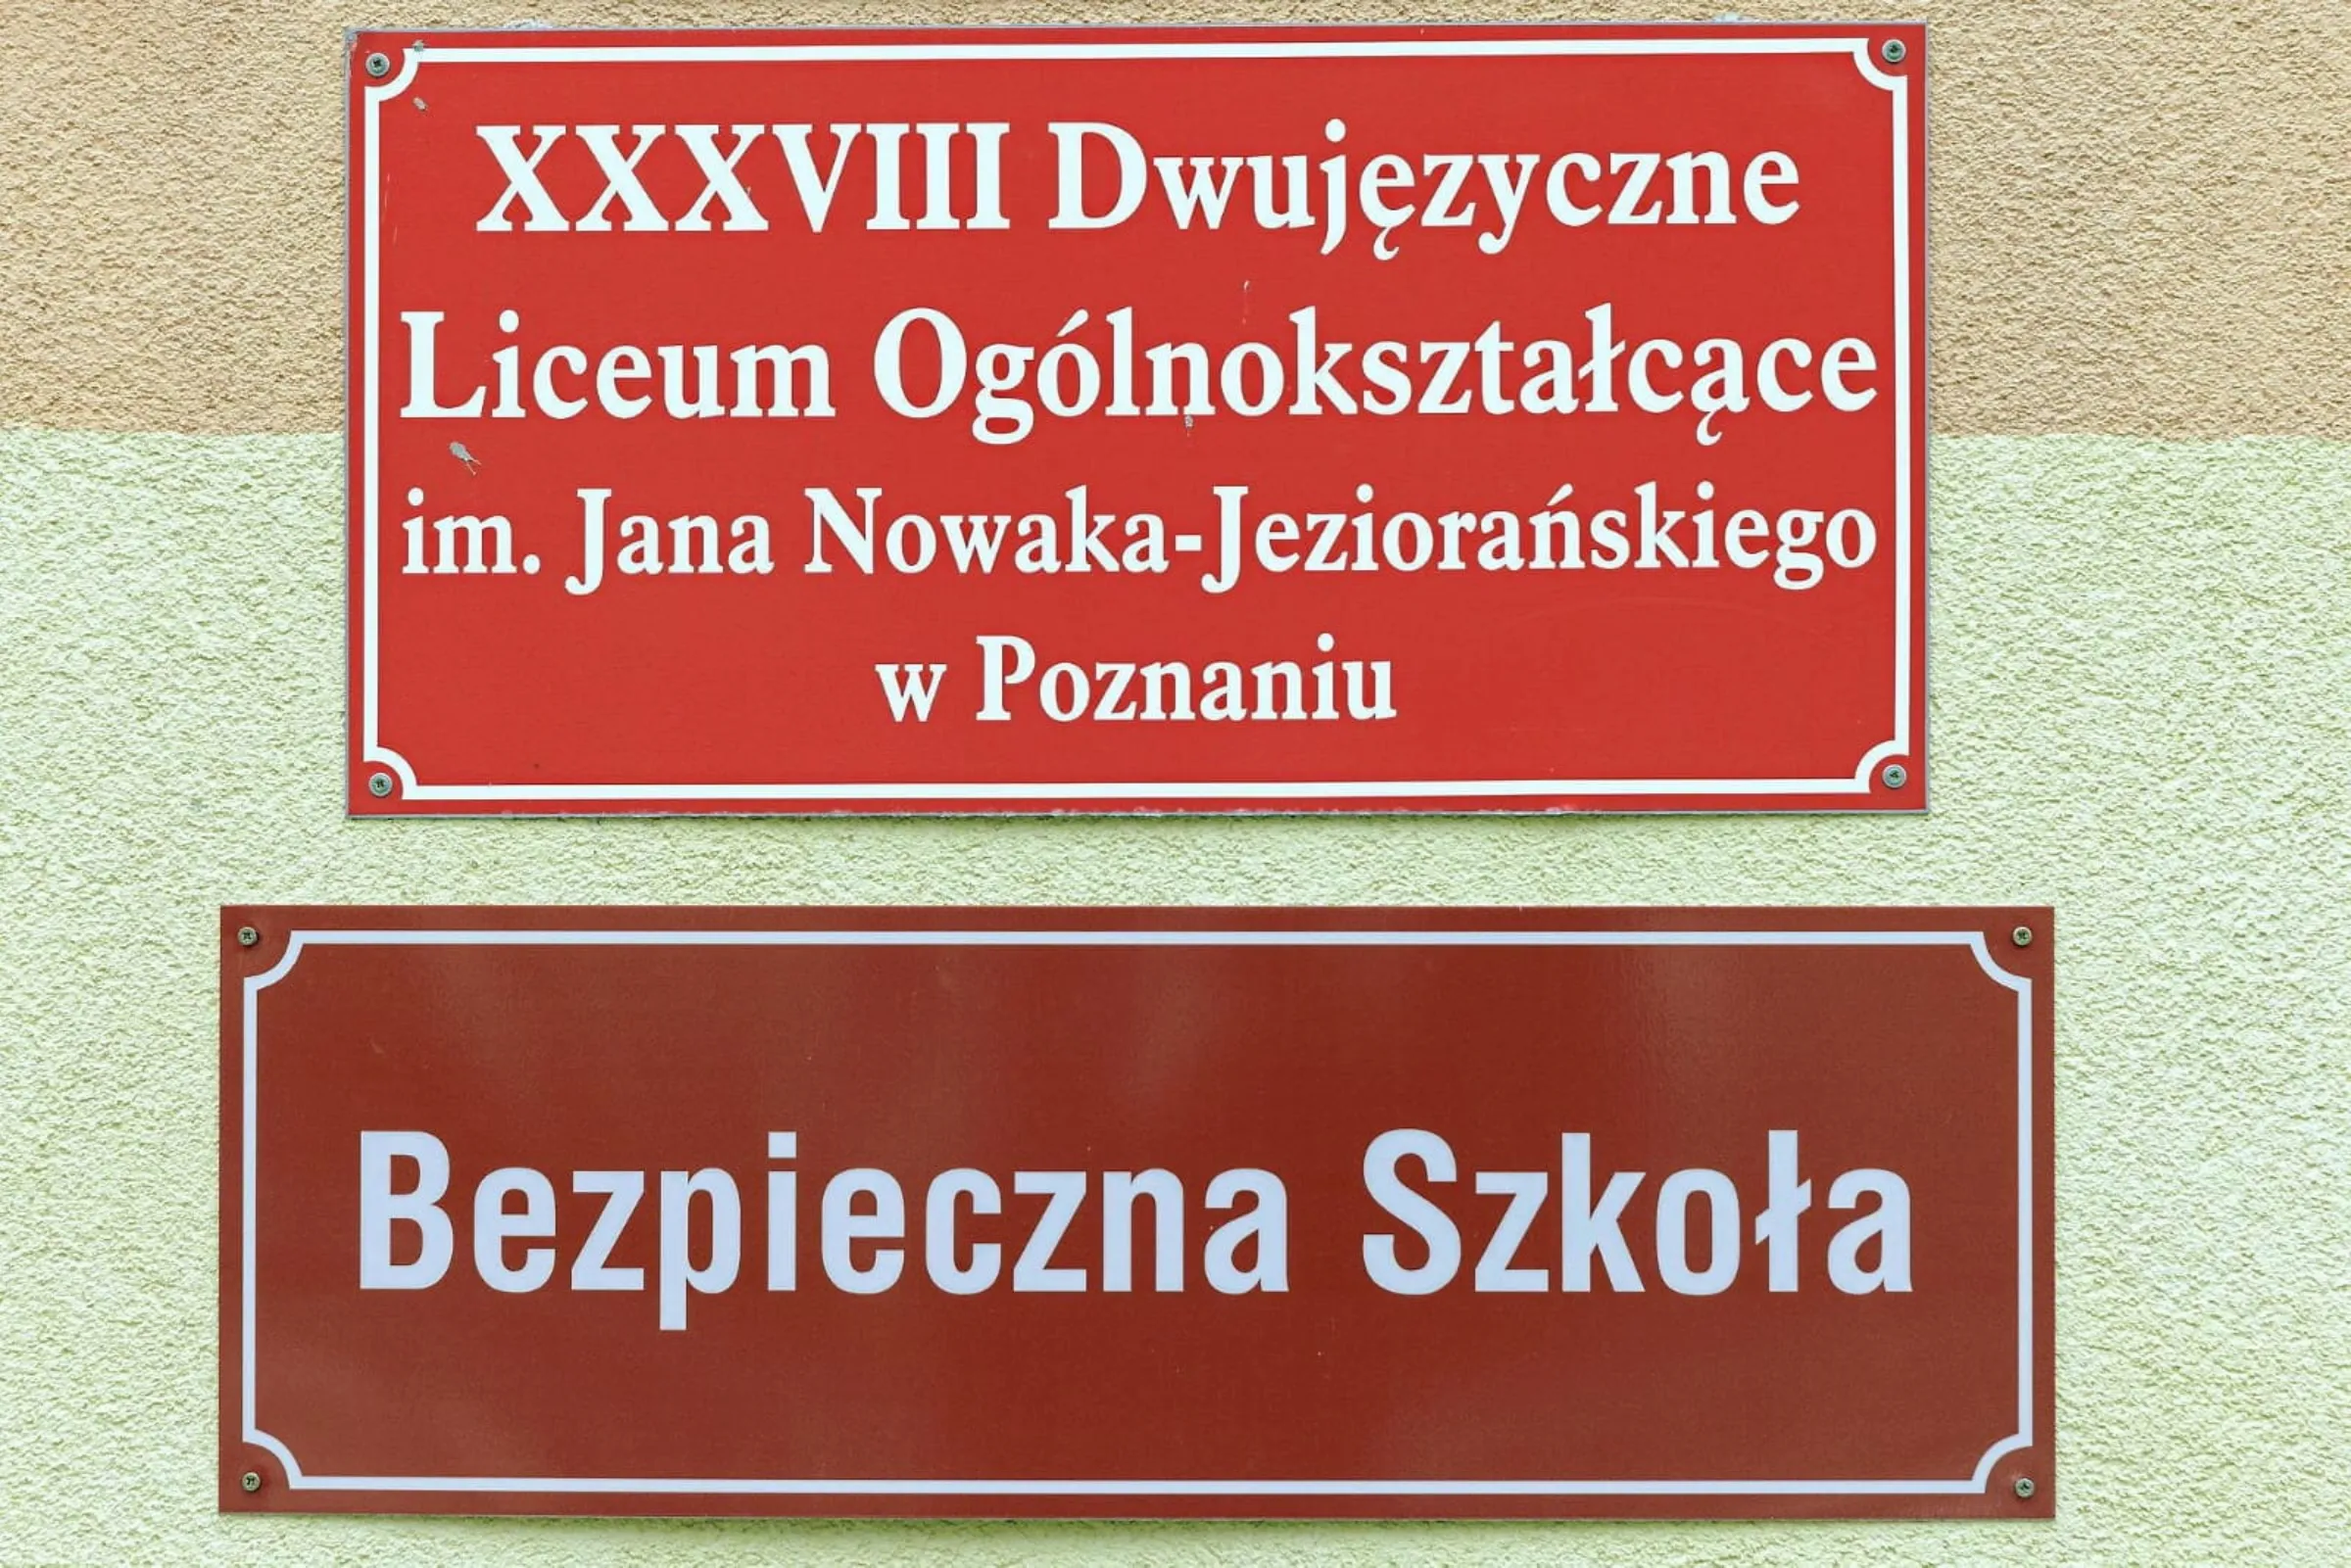 A plaque at the entrance of the 38th Bilingual High School Jan Nowak-Jezioranski in Poznan, in western Poland, labels the institution as a "safe school" after it won first place in the country’s pioneering ranking of LGBTQ+ inclusion in schools - the first of its kind in the European Union